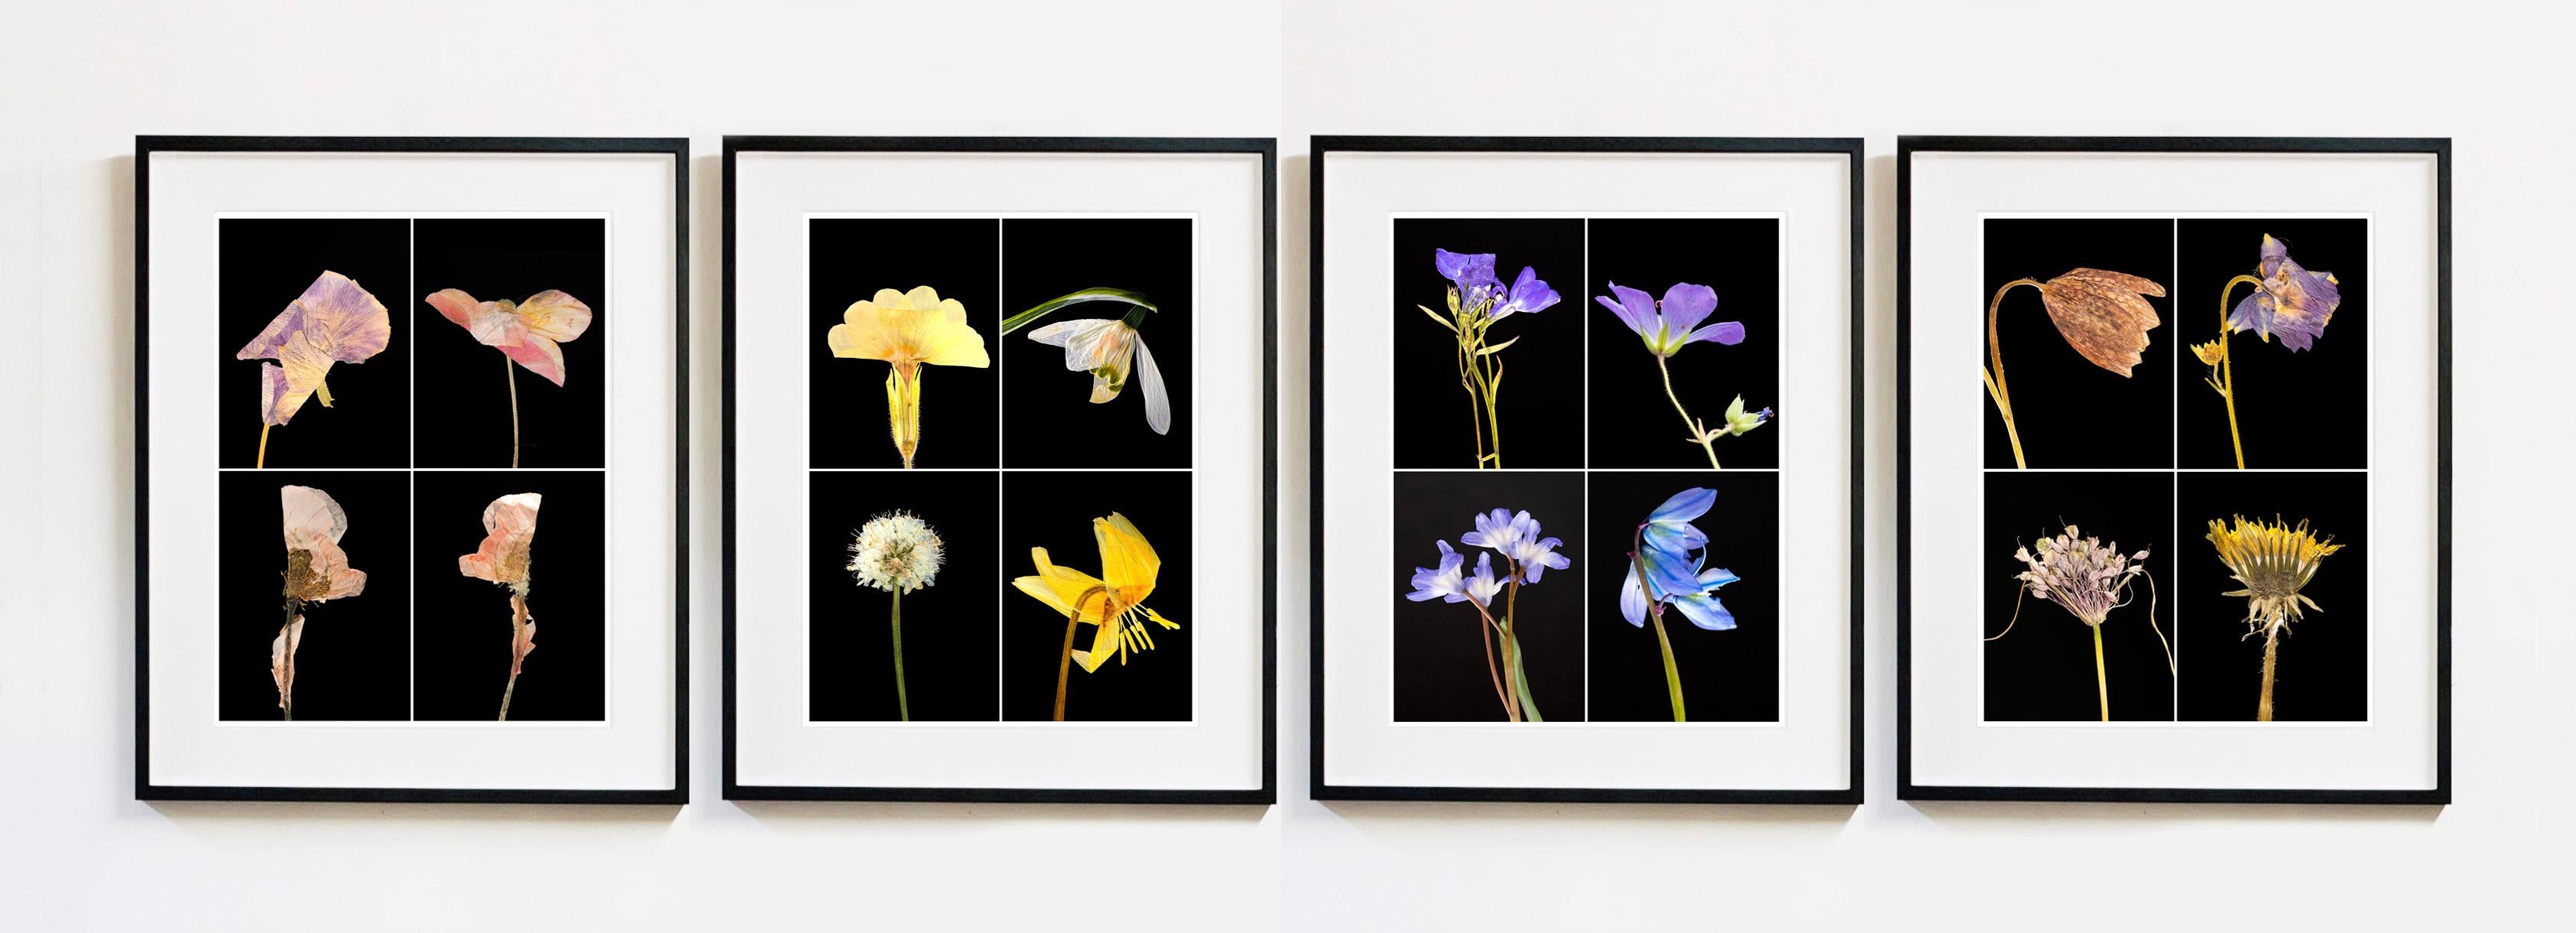 Set of Four framed botanical pressed flower photograph by Martin Parker.

Martin's innovative photographs are created from plants grown by himself in his garden and greenhouse in Cambridge. A keen horticulturist, he cultivates his own plants and